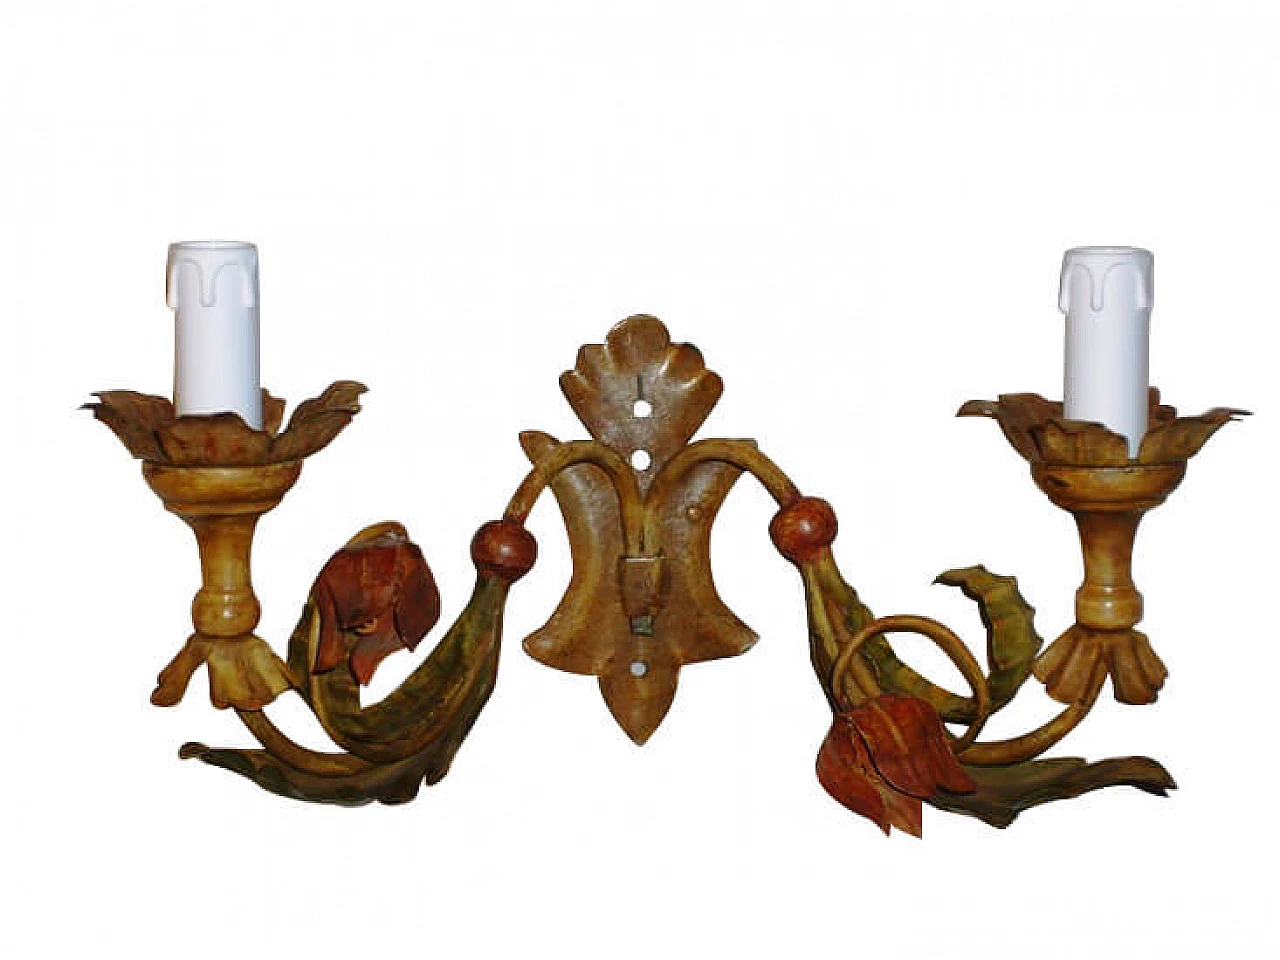 Metal wall sconce with 2 point light buds 1102734